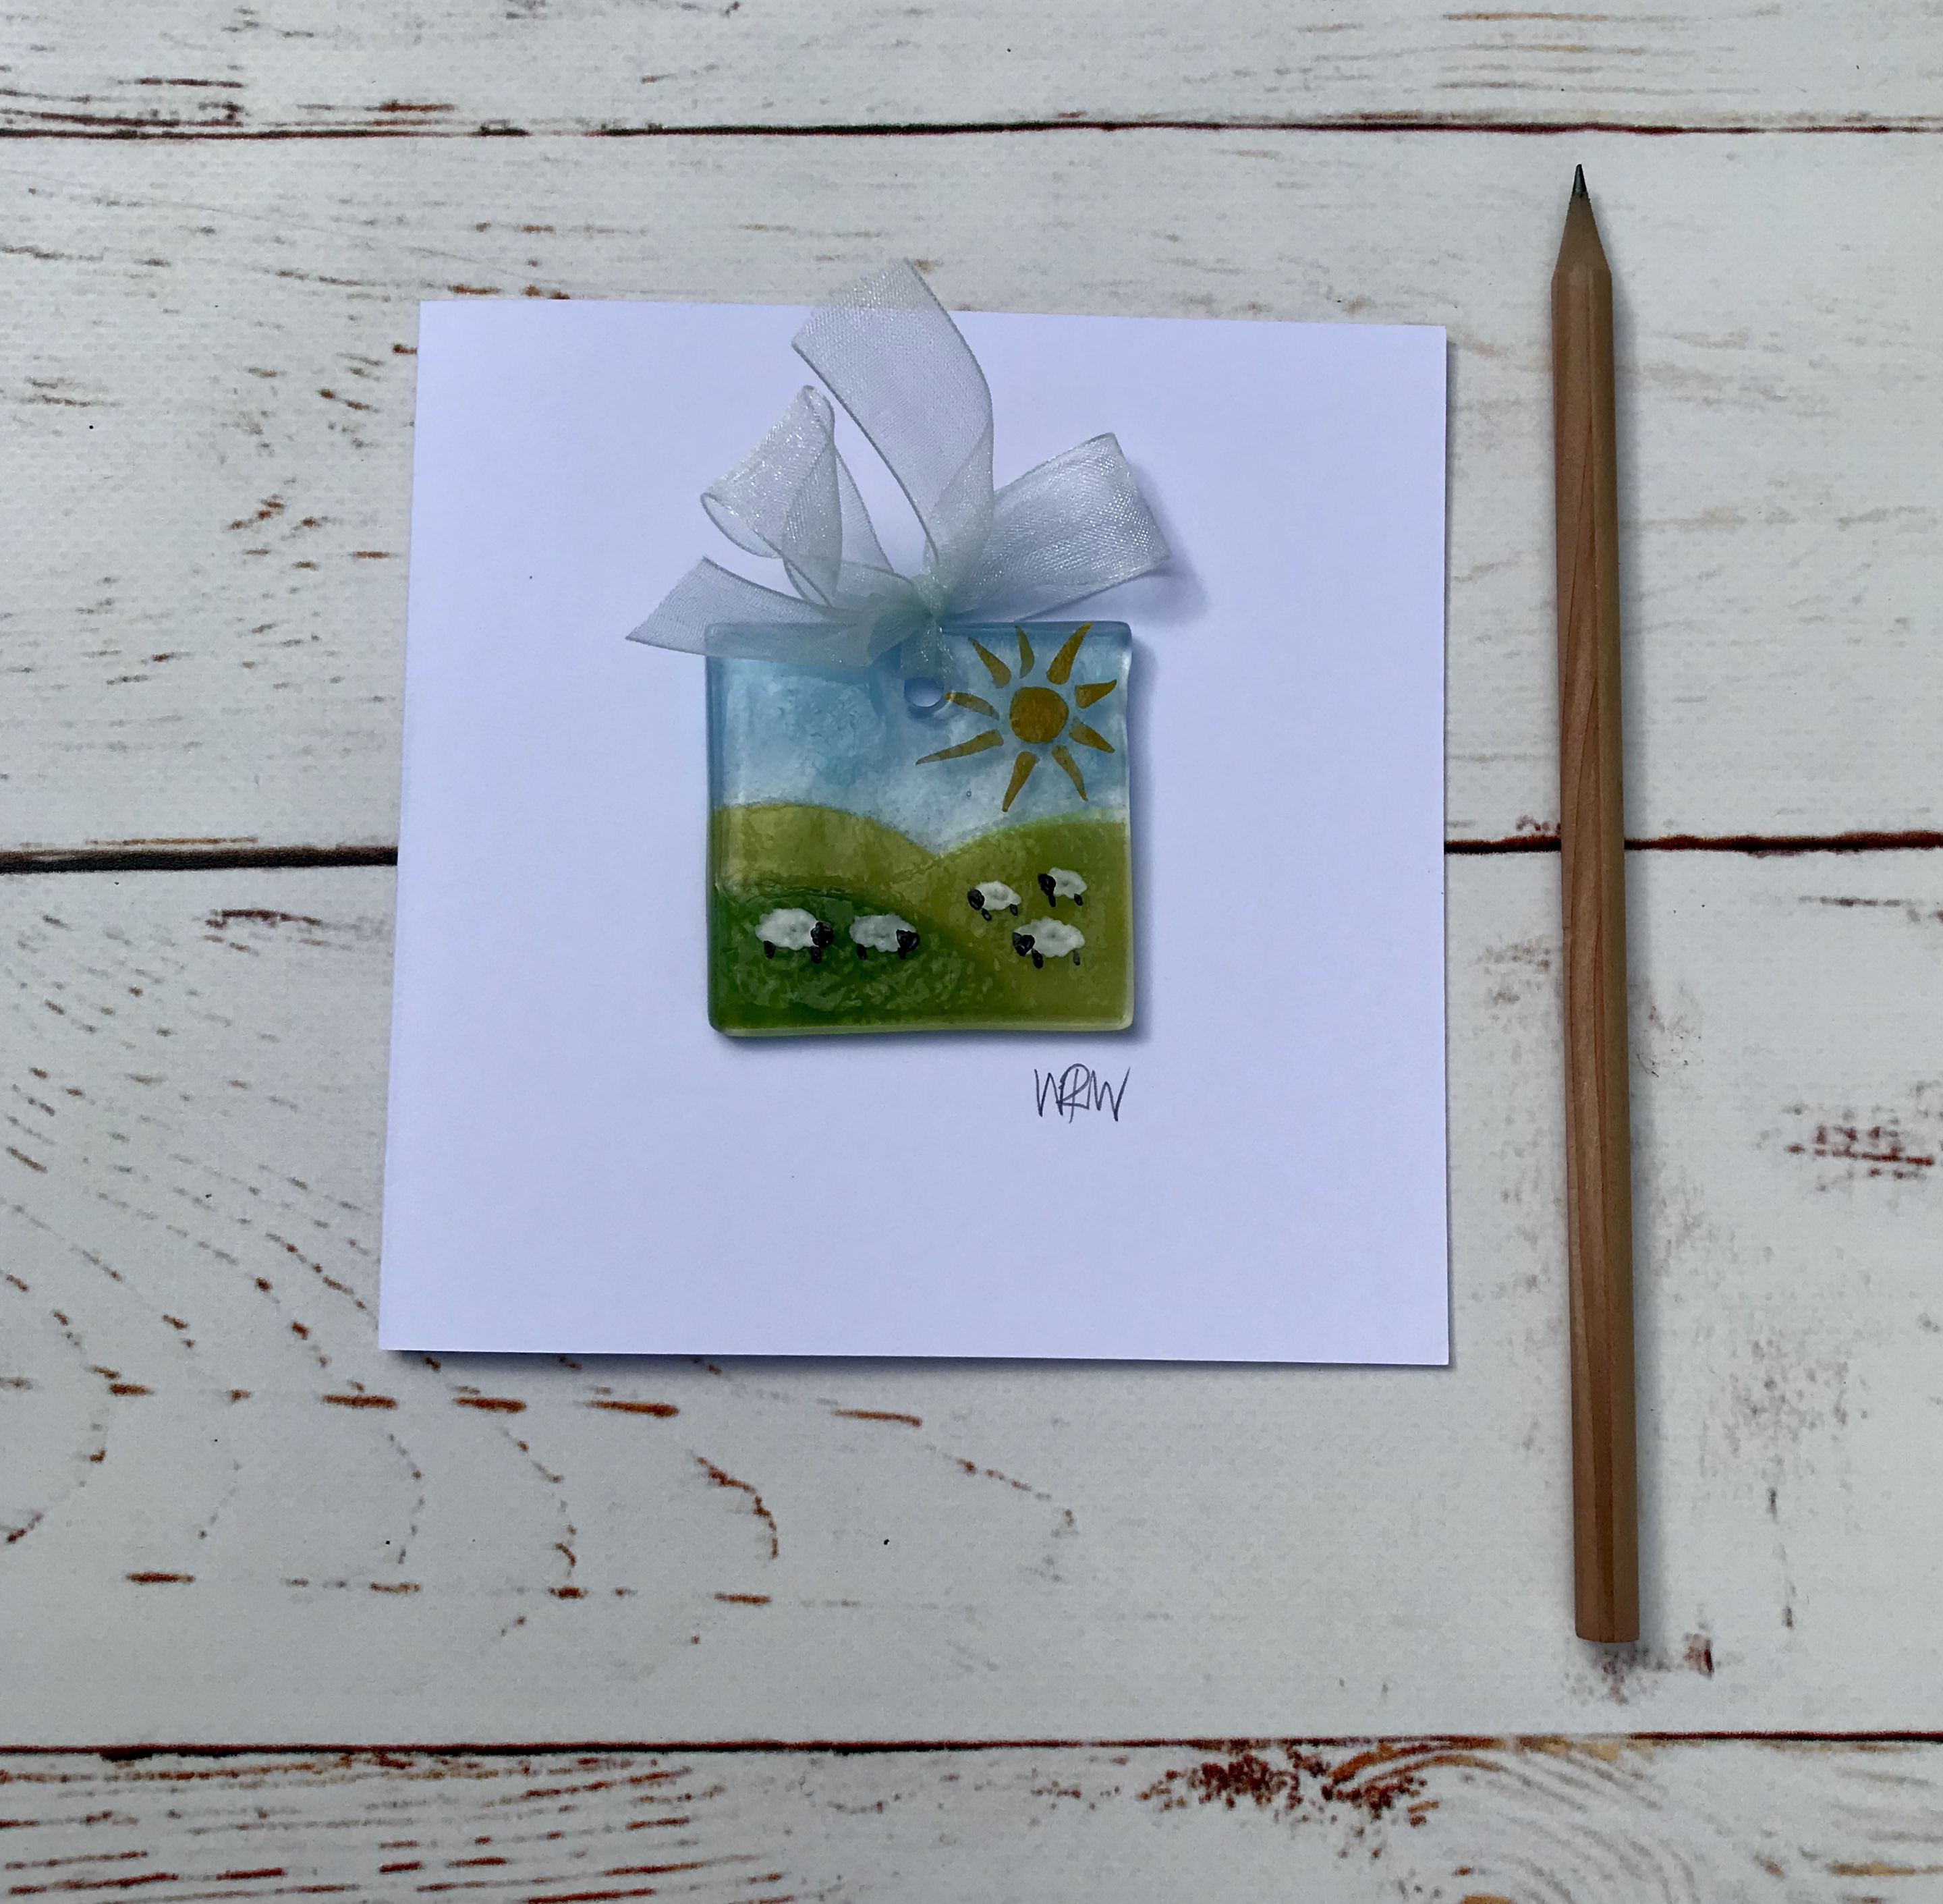 Blank greetings card with tiny glass sheep on hills suncatcher